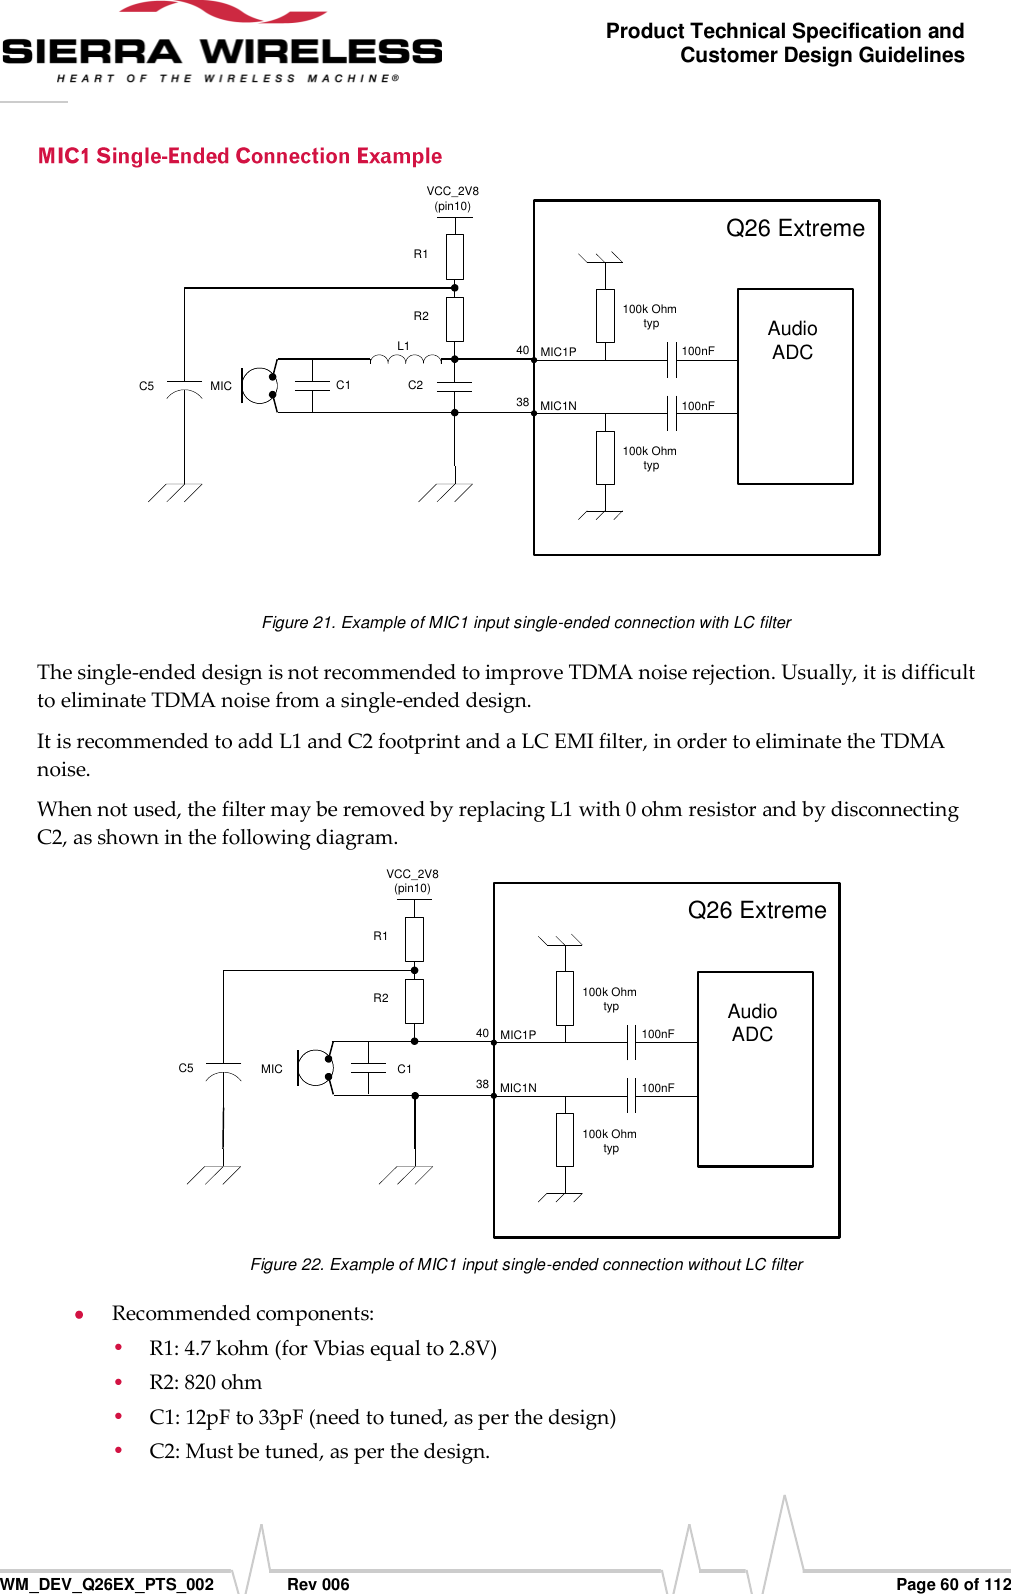      WM_DEV_Q26EX_PTS_002  Rev 006  Page 60 of 112 Product Technical Specification and Customer Design Guidelines L1C2C1MICVCC_2V8(pin10)R2R1C5AudioADC100k Ohm typ100k Ohm typ100nF100nFMIC1PMIC1N4038Q26 Extreme  Figure 21. Example of MIC1 input single-ended connection with LC filter The single-ended design is not recommended to improve TDMA noise rejection. Usually, it is difficult to eliminate TDMA noise from a single-ended design. It is recommended to add L1 and C2 footprint and a LC EMI filter, in order to eliminate the TDMA noise. When not used, the filter may be removed by replacing L1 with 0 ohm resistor and by disconnecting C2, as shown in the following diagram. C1MICVCC_2V8(pin10)R2R1C5AudioADC100k Ohm typ100k Ohm typ100nF100nFMIC1PMIC1N4038Q26 Extreme Figure 22. Example of MIC1 input single-ended connection without LC filter  Recommended components:  R1: 4.7 kohm (for Vbias equal to 2.8V)  R2: 820 ohm  C1: 12pF to 33pF (need to tuned, as per the design)  C2: Must be tuned, as per the design. 